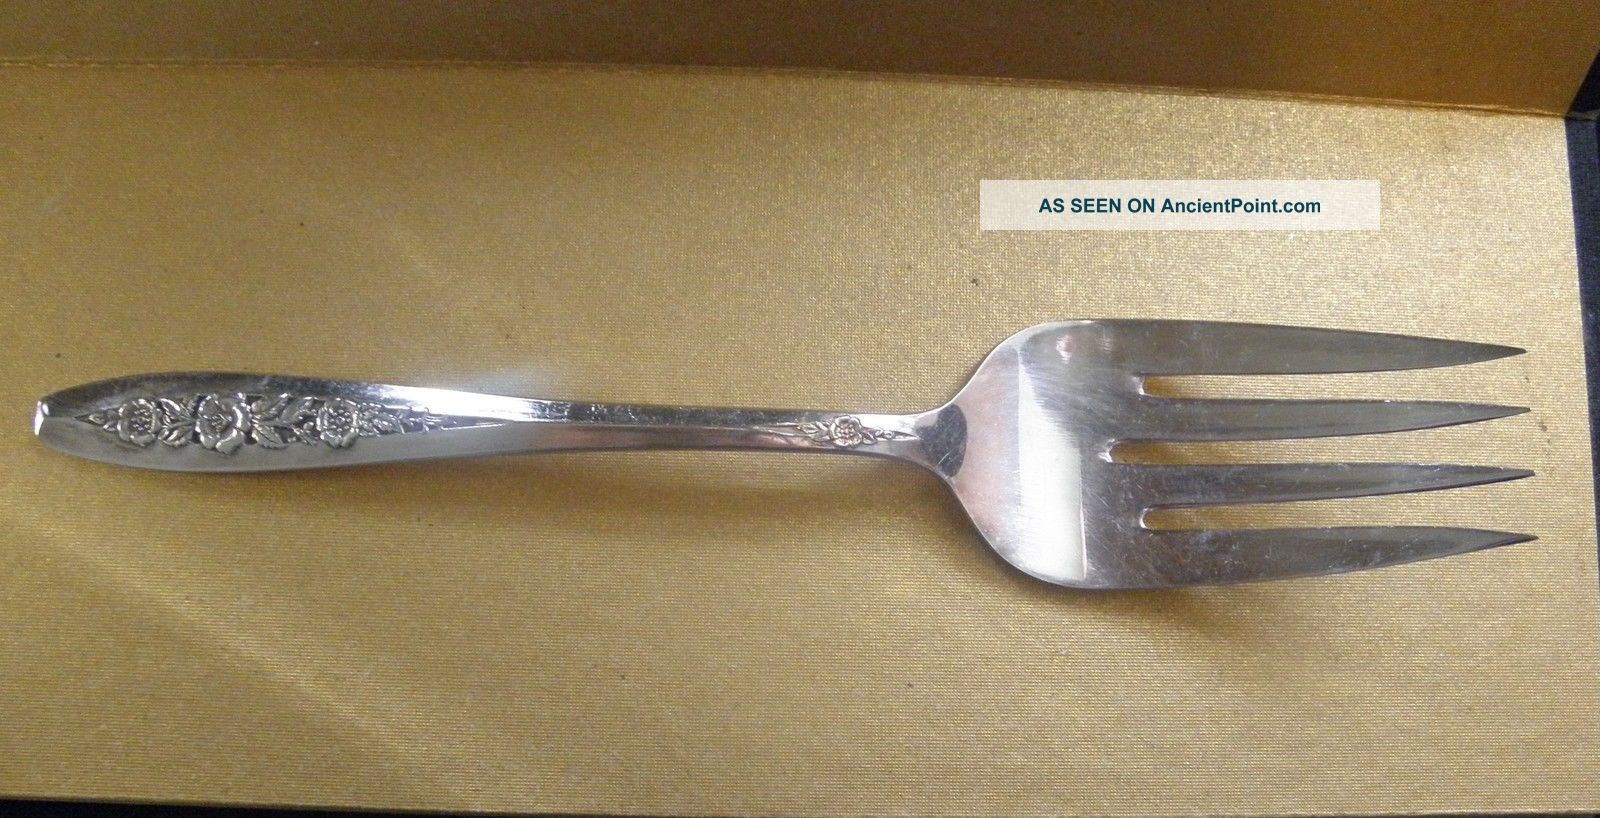 1952 Wm Rogers & Son Is Primrose Silverplate Meat Serving Fork - 8 7/8 Inches Flatware & Silverware photo